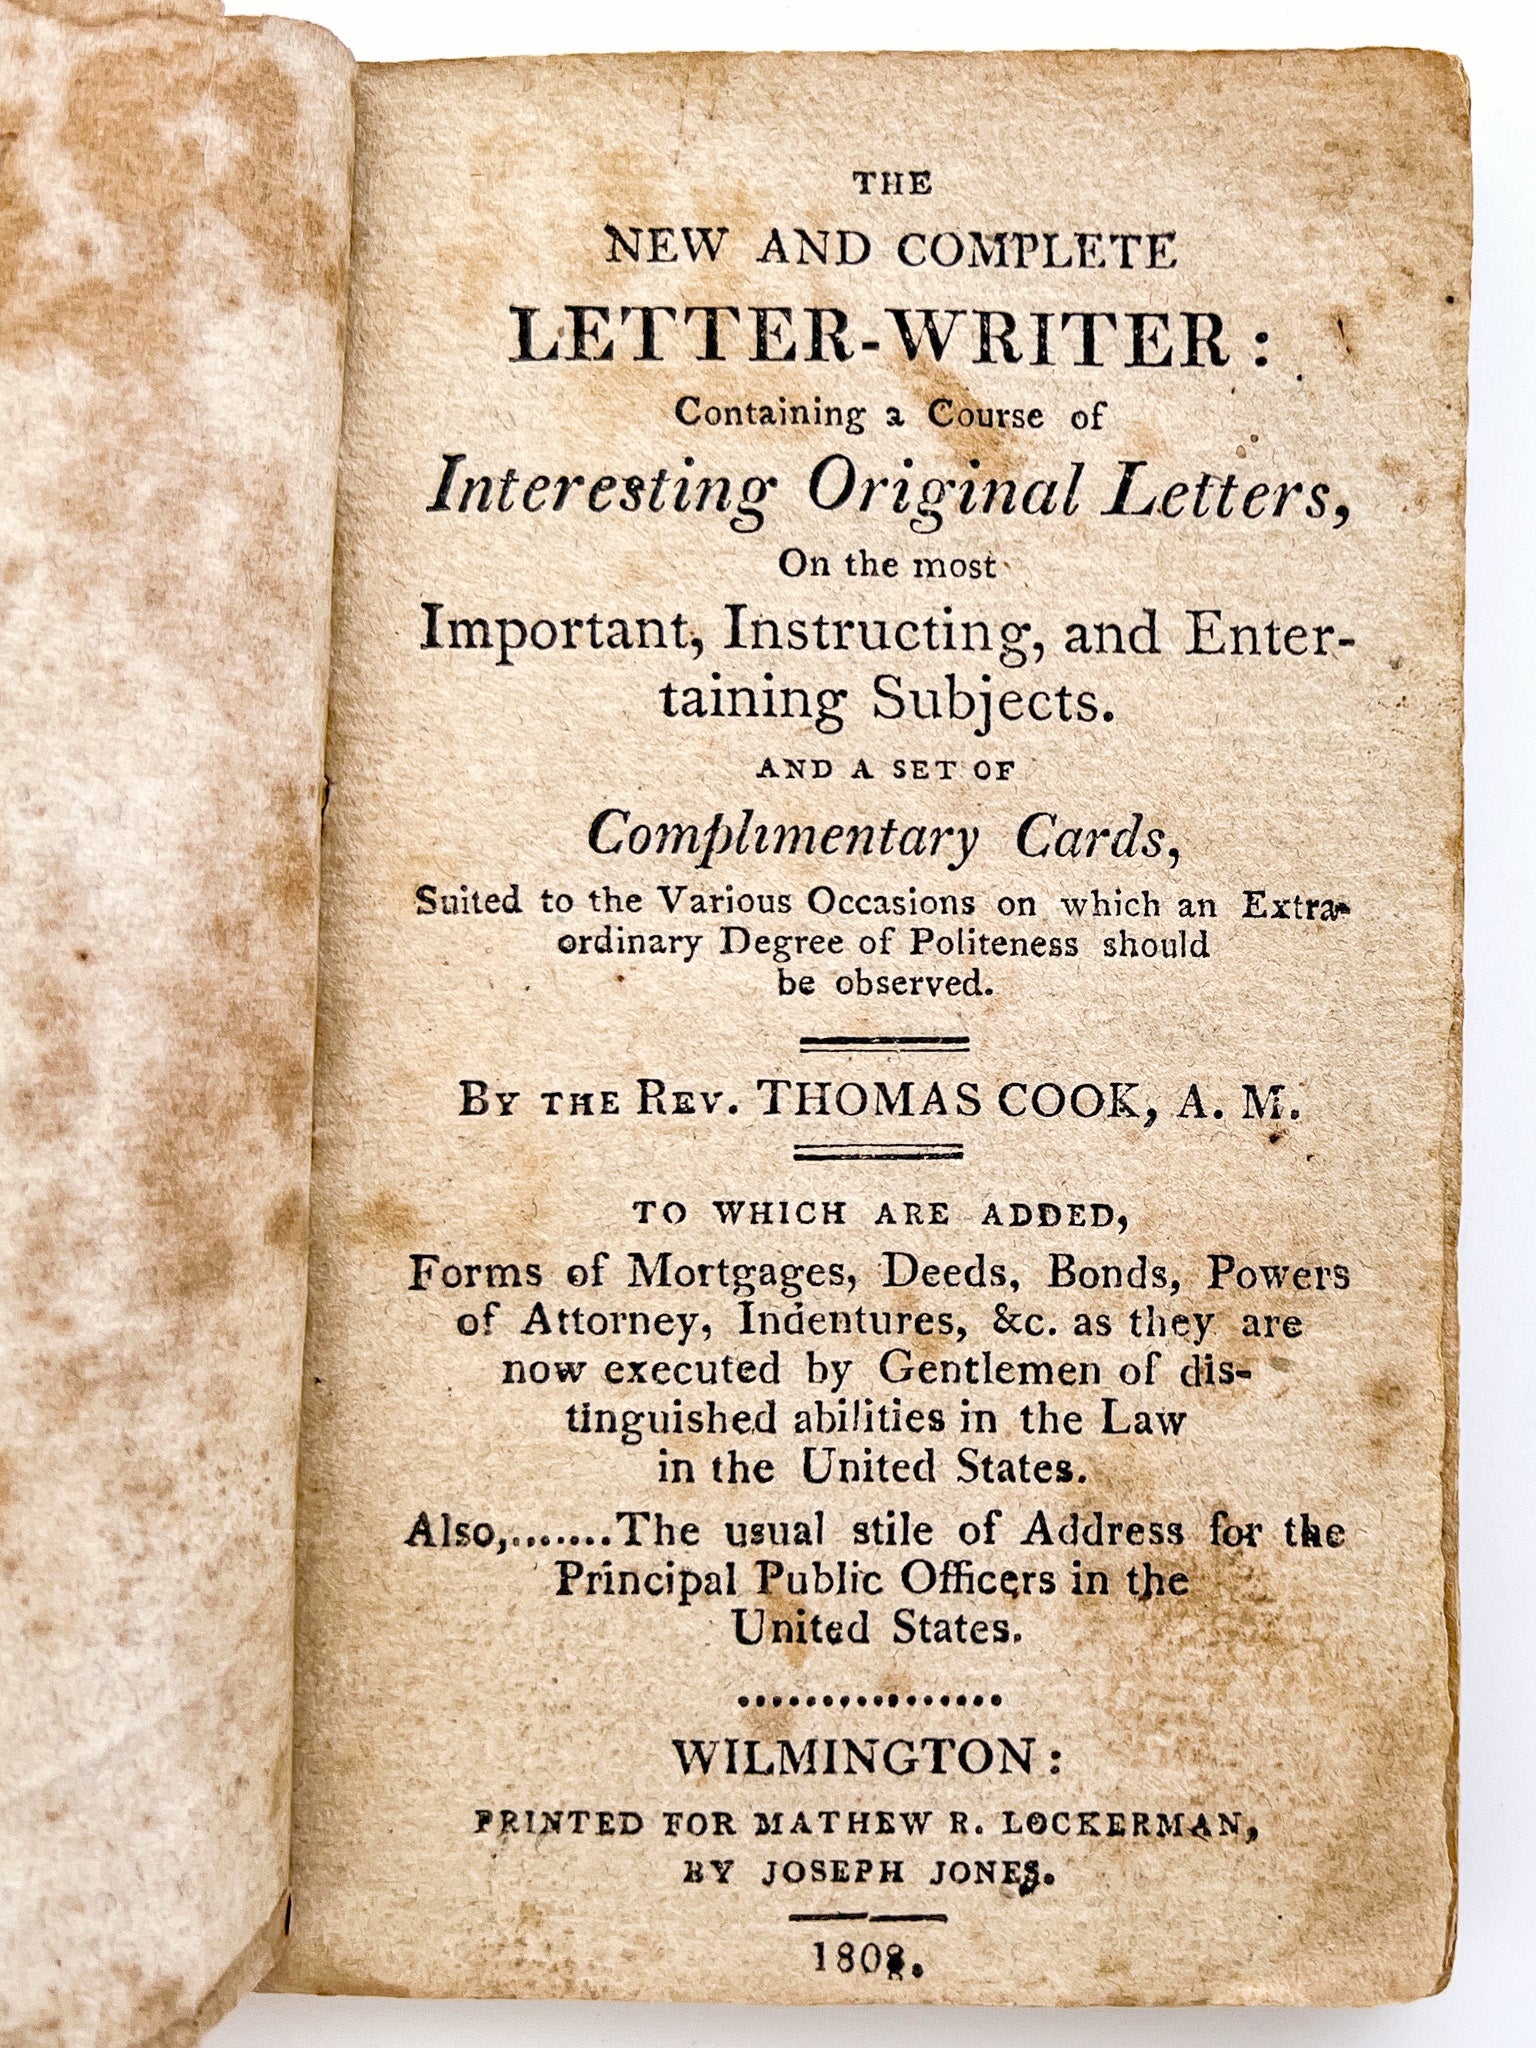 The New and Complete Letter-Writer: Containing a Course of Interesting Original Letters, on the Most Important, Instructing, and Entertaining Subjects. And a Set of Complimentary Cards...